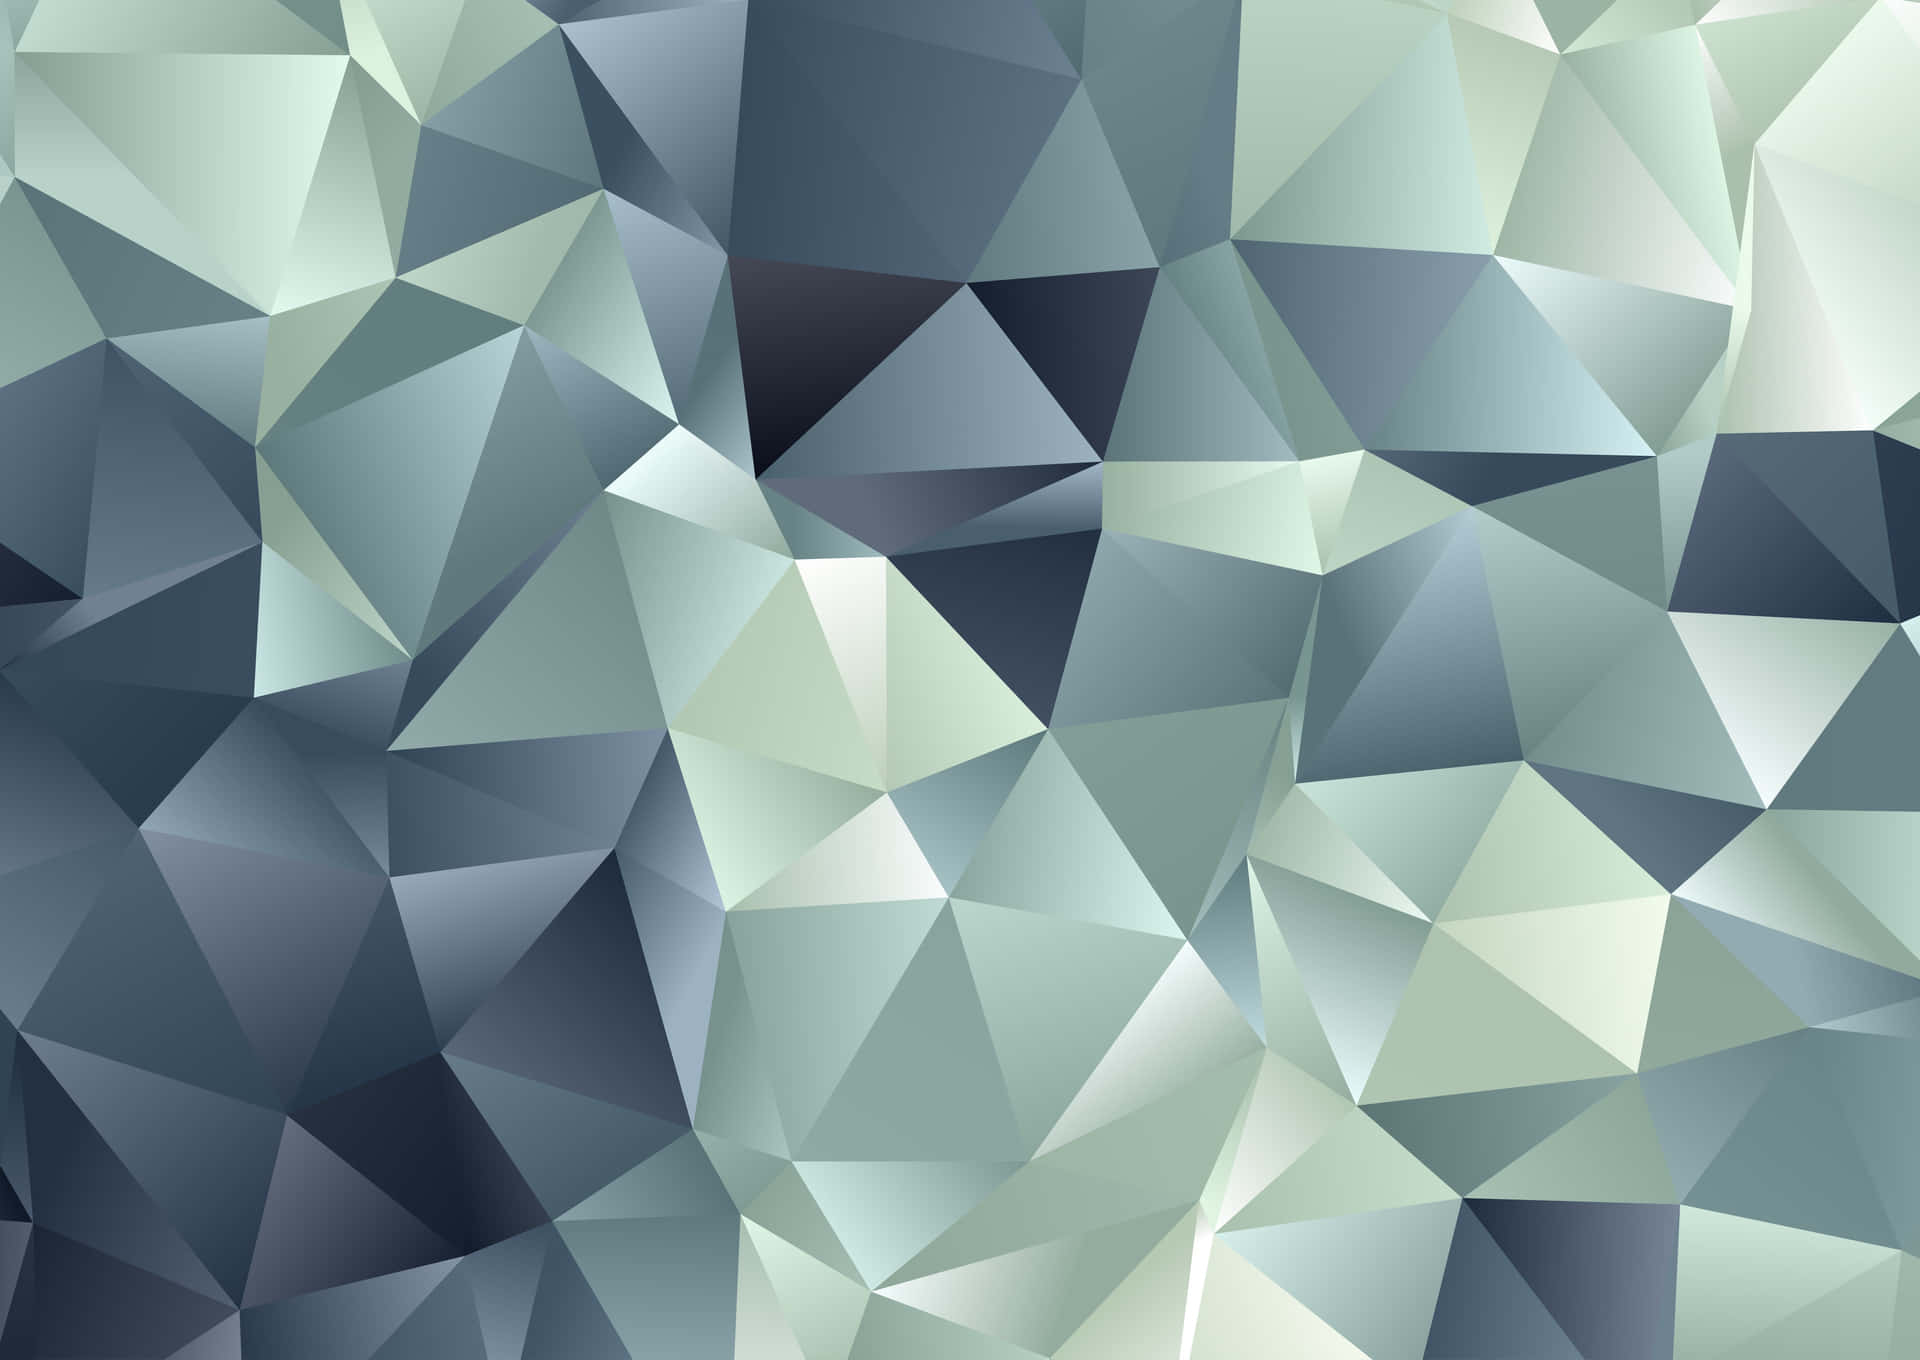 A blue and white abstract image with the title 'Blue and white abstract' - Low poly